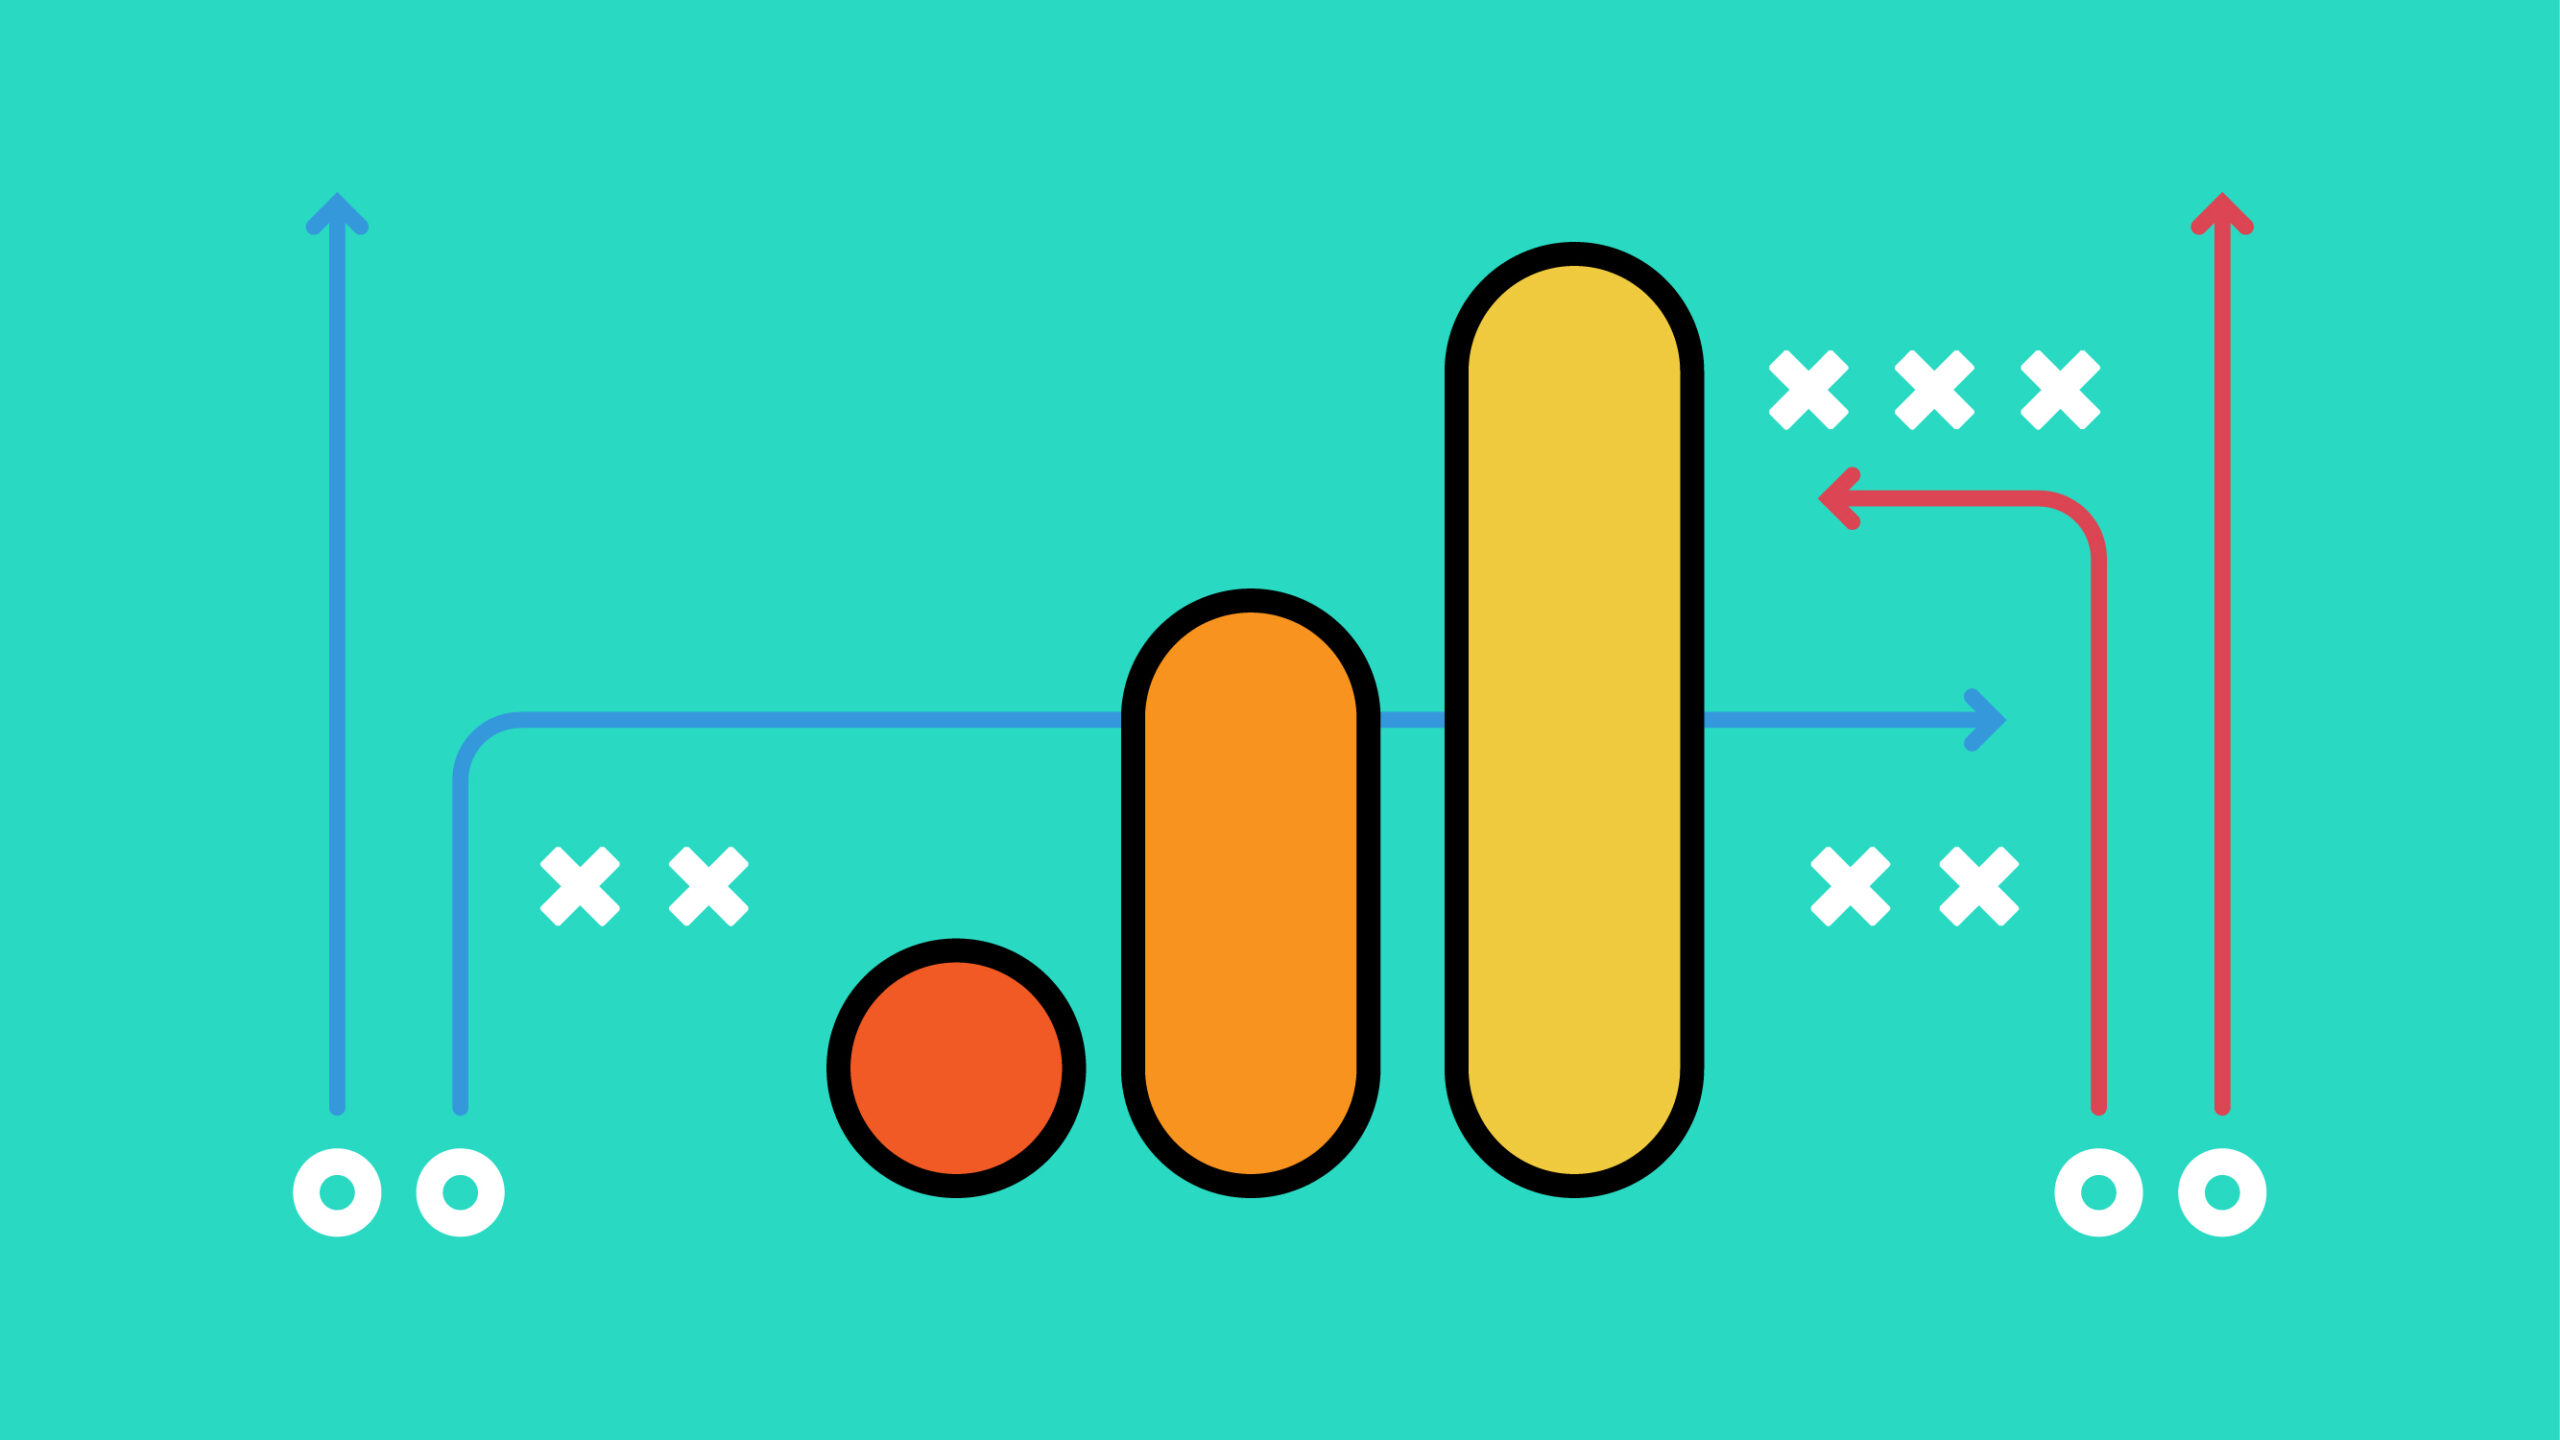 Google analytics icon with arrows and x's and o's